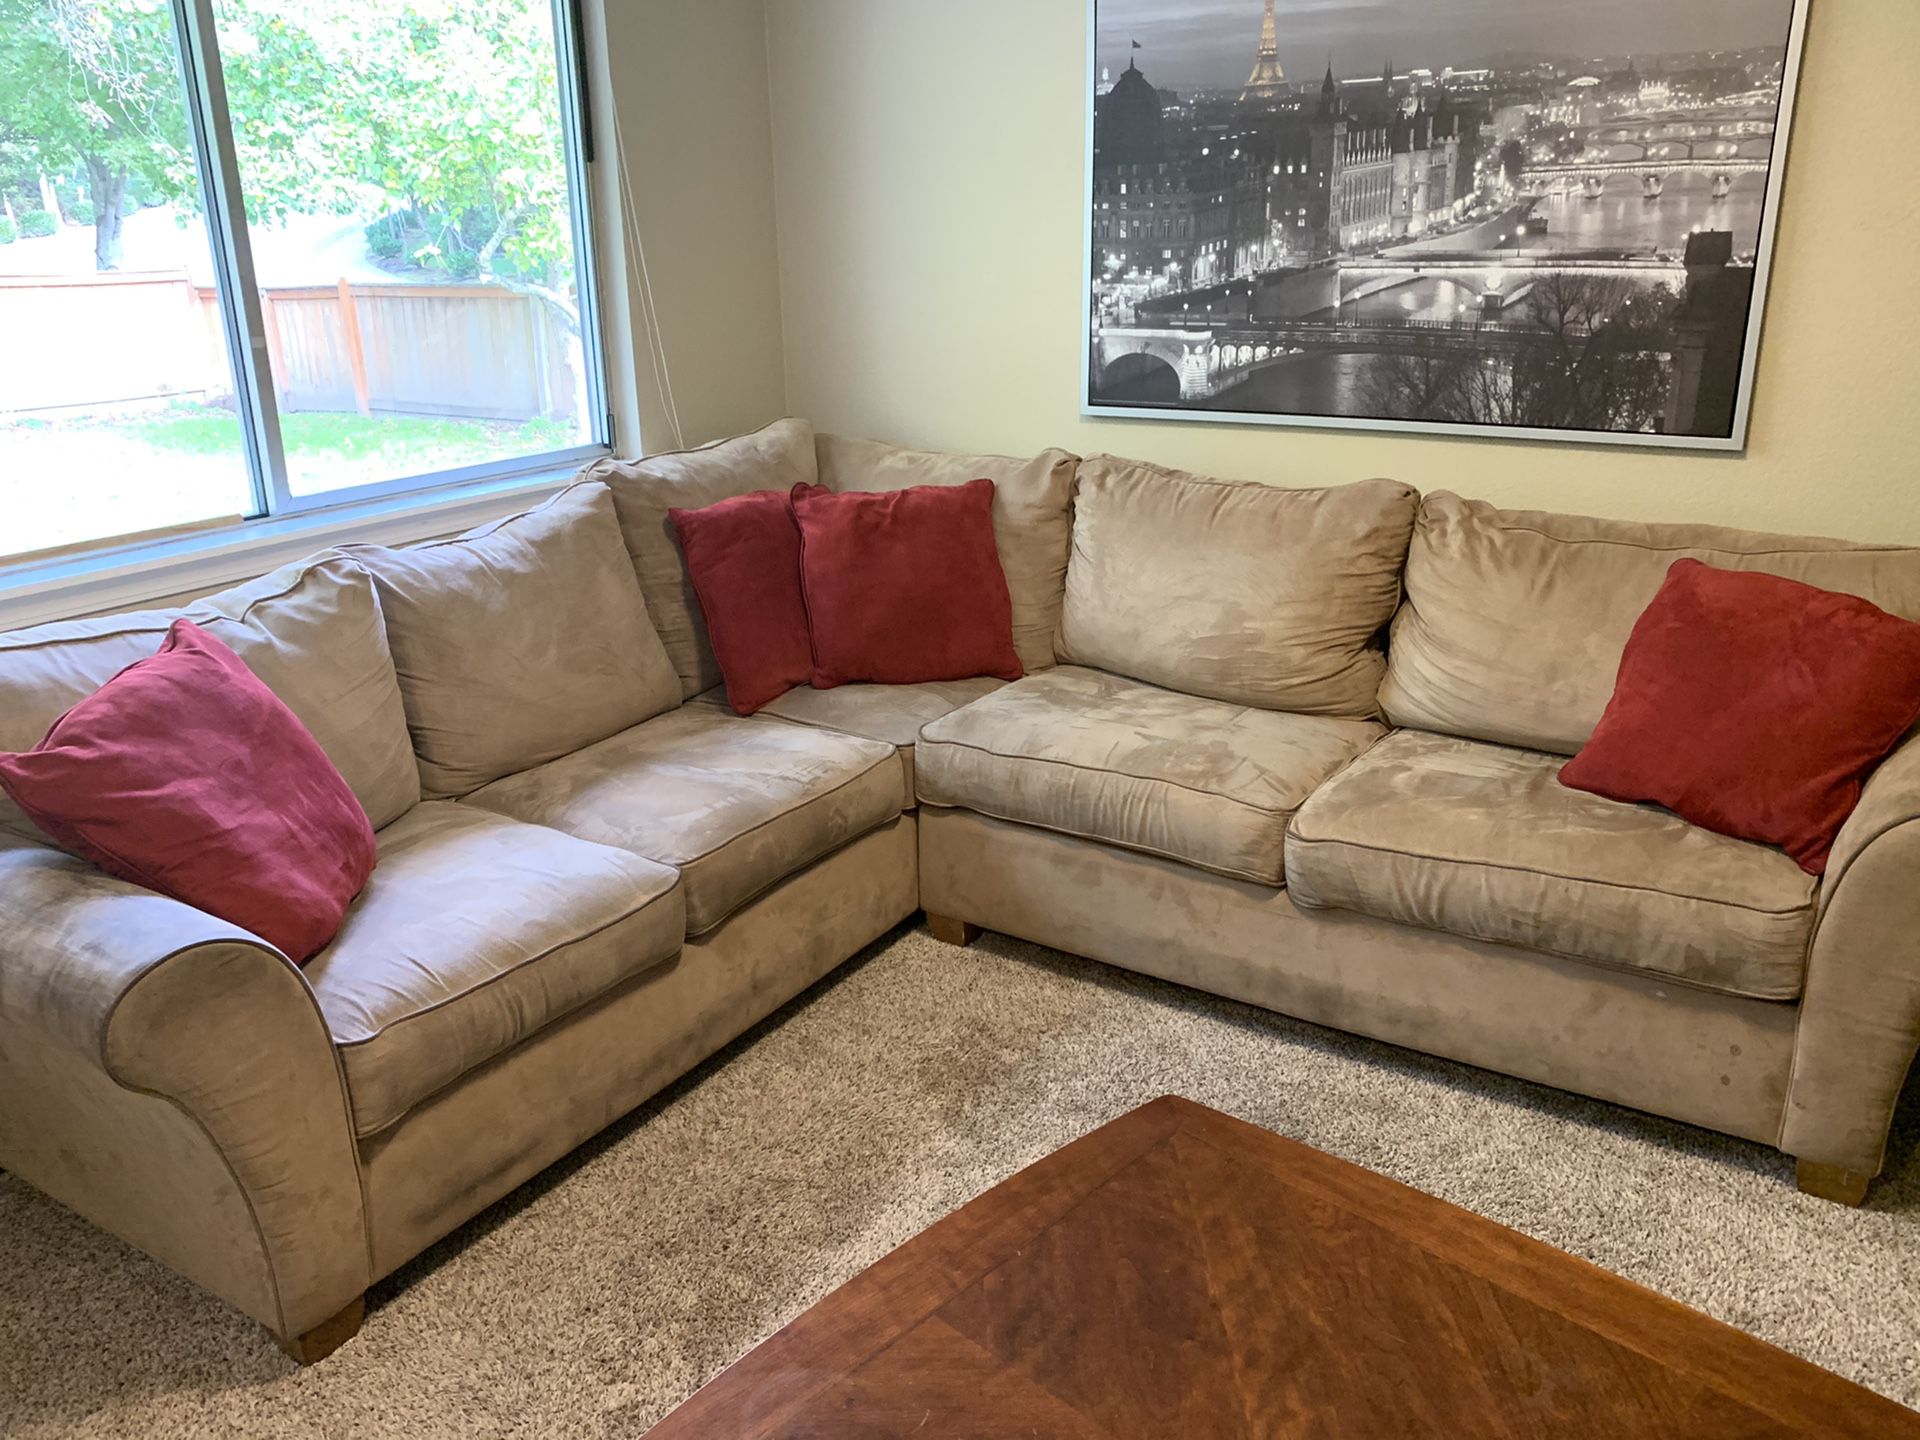 Sectional Couch - Tan/Camel Color